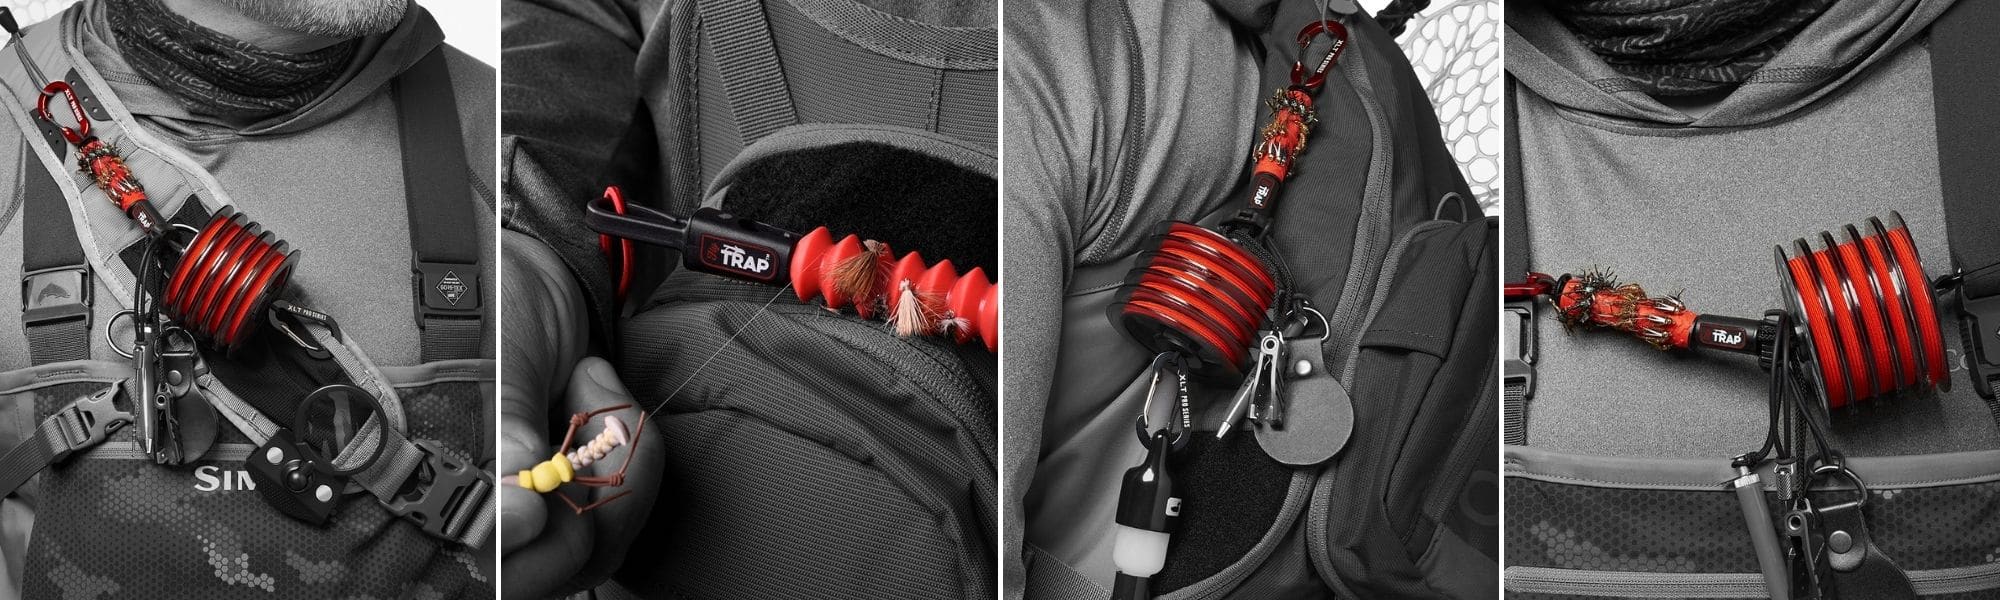 XLT Fly Trap Tippet Holder Pro Series - lifestyle photos